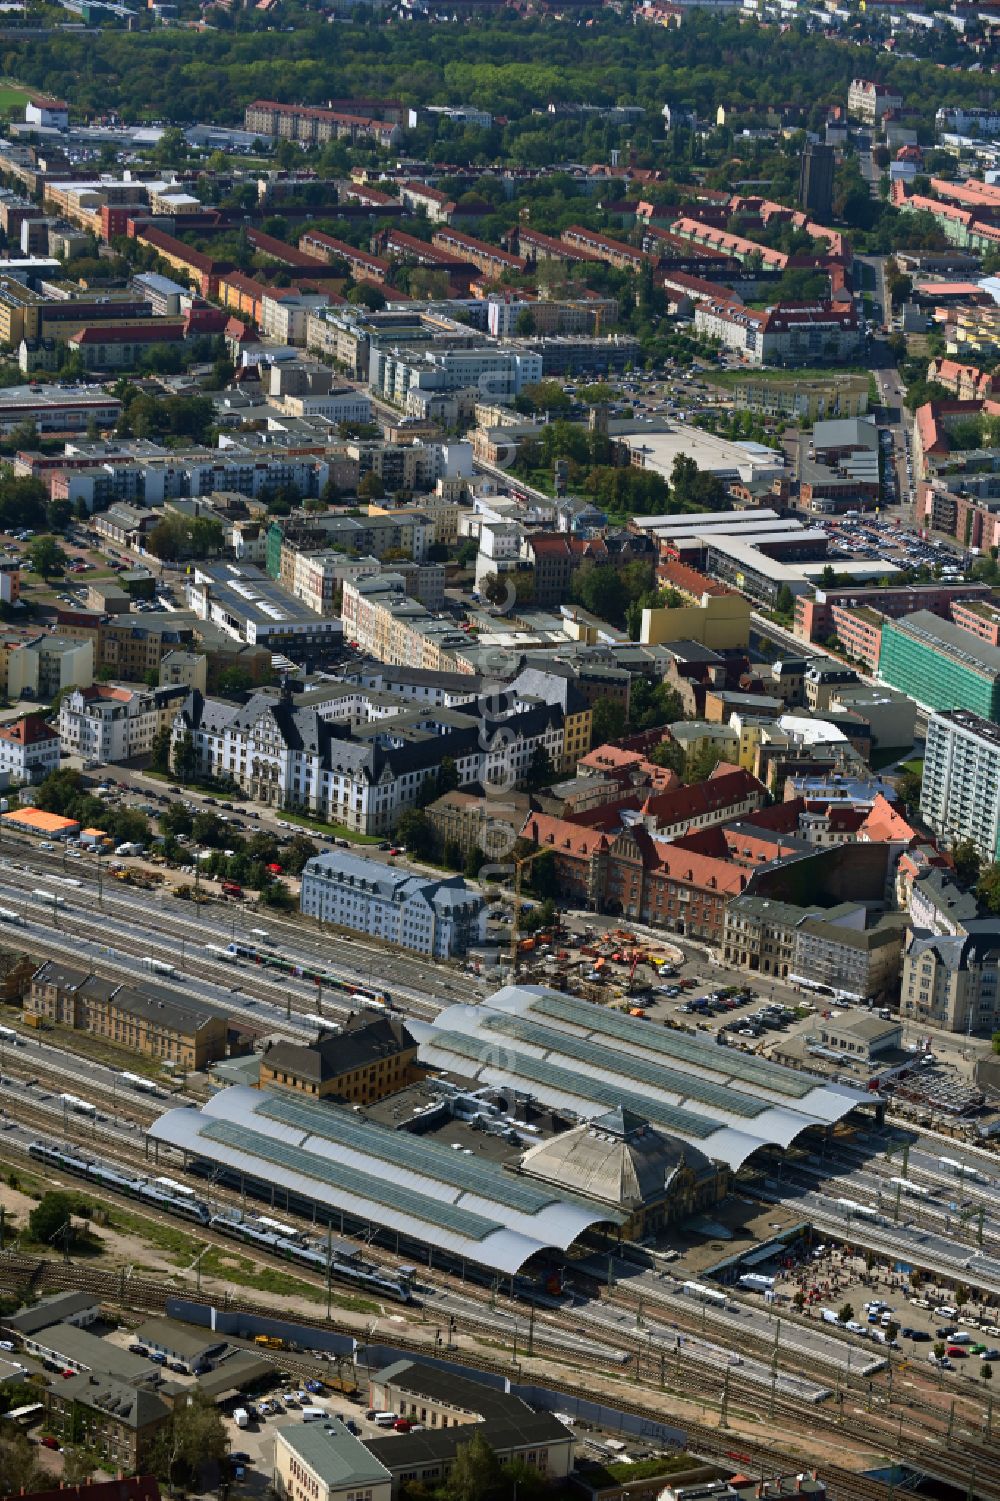 Halle (Saale) from the bird's eye view: Track progress and building of the main station of the railway in Halle (Saale) in the state Saxony-Anhalt, Germany